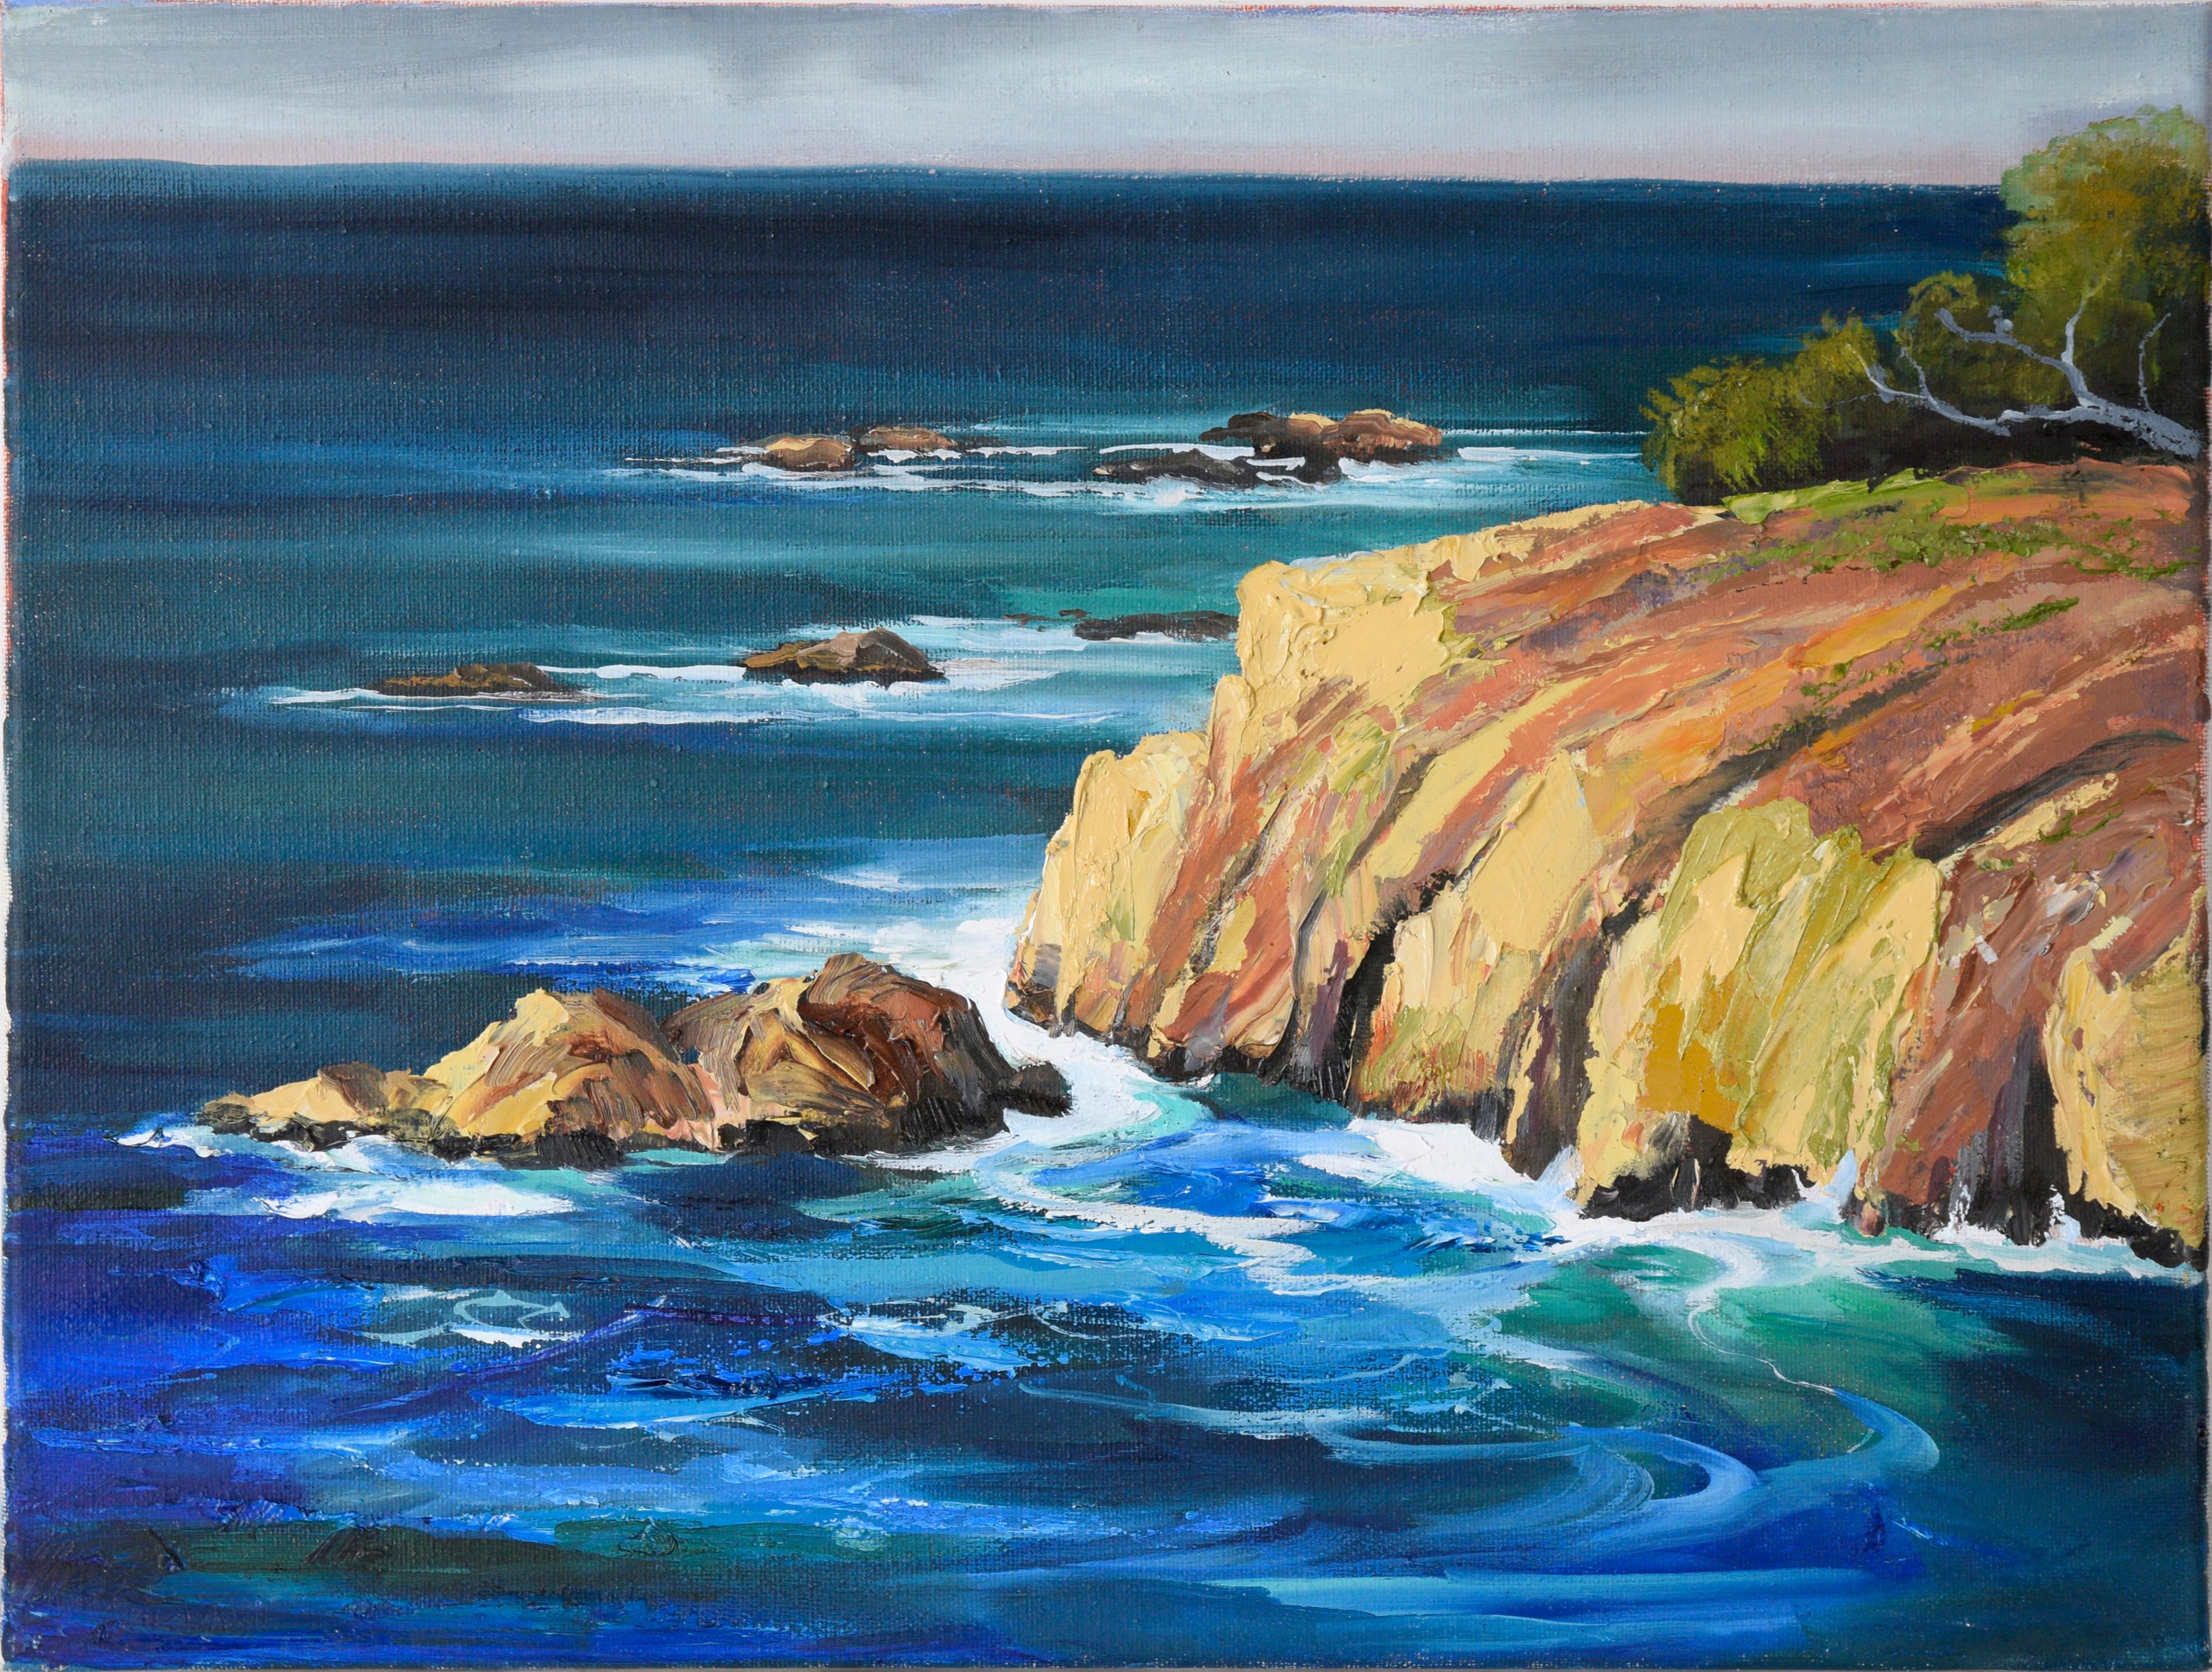 Kathleen Murray Landscape Painting - Coastal Cliffs and Rocks - Hurricane Point - Big Sur Seascape in Oil on Canvas